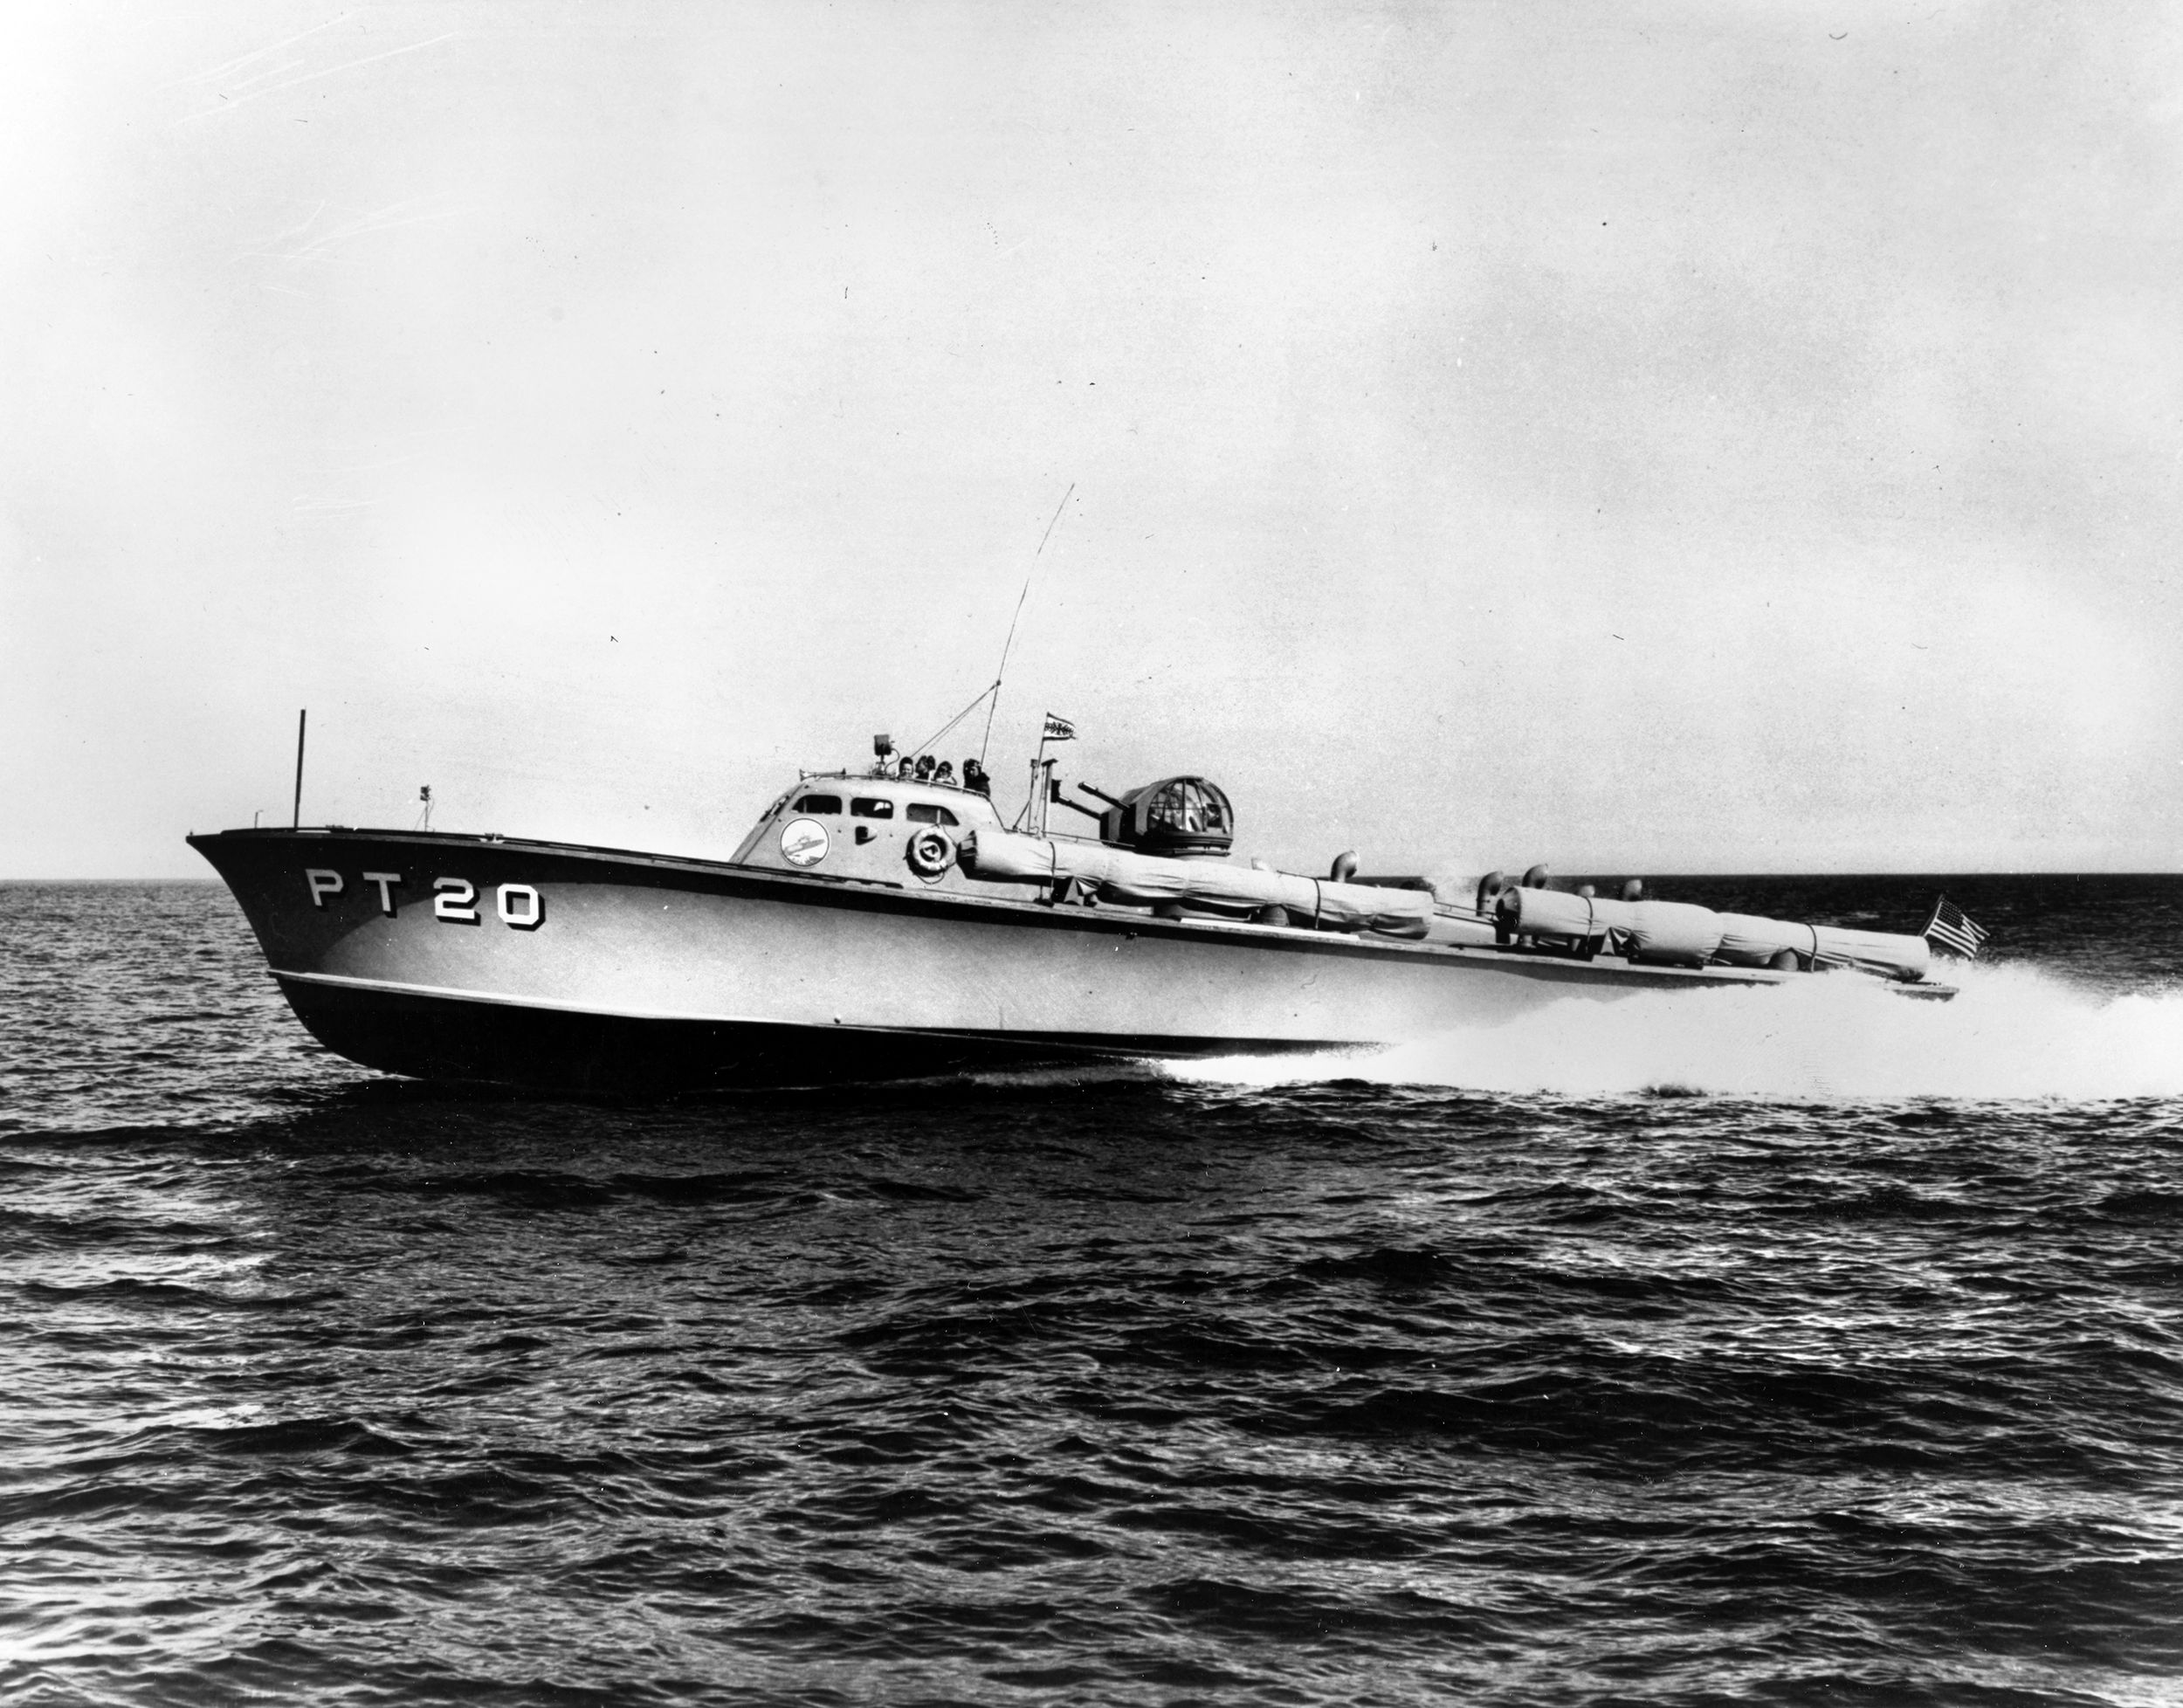 PT-20, built by the Electric Launch Company (Elco) of Bayonne, New Jersey, was the first vessel of Motor Torpedo Squadron One (MTBRon 1), formed on July 24, 1940, as the first operational command for U.S. Navy’s new Patrol Torpedo boats. Popularly believed to be made of plywood, PT boat hulls were constructed of two layers of one-inch mahogany planks with canvas (impregnated with glue or lead paint) between them. A planing hull and the horsepower of three Packard 3A-2500 V-12 liquid-cooled aircraft engines gave the small craft exceptional speed.